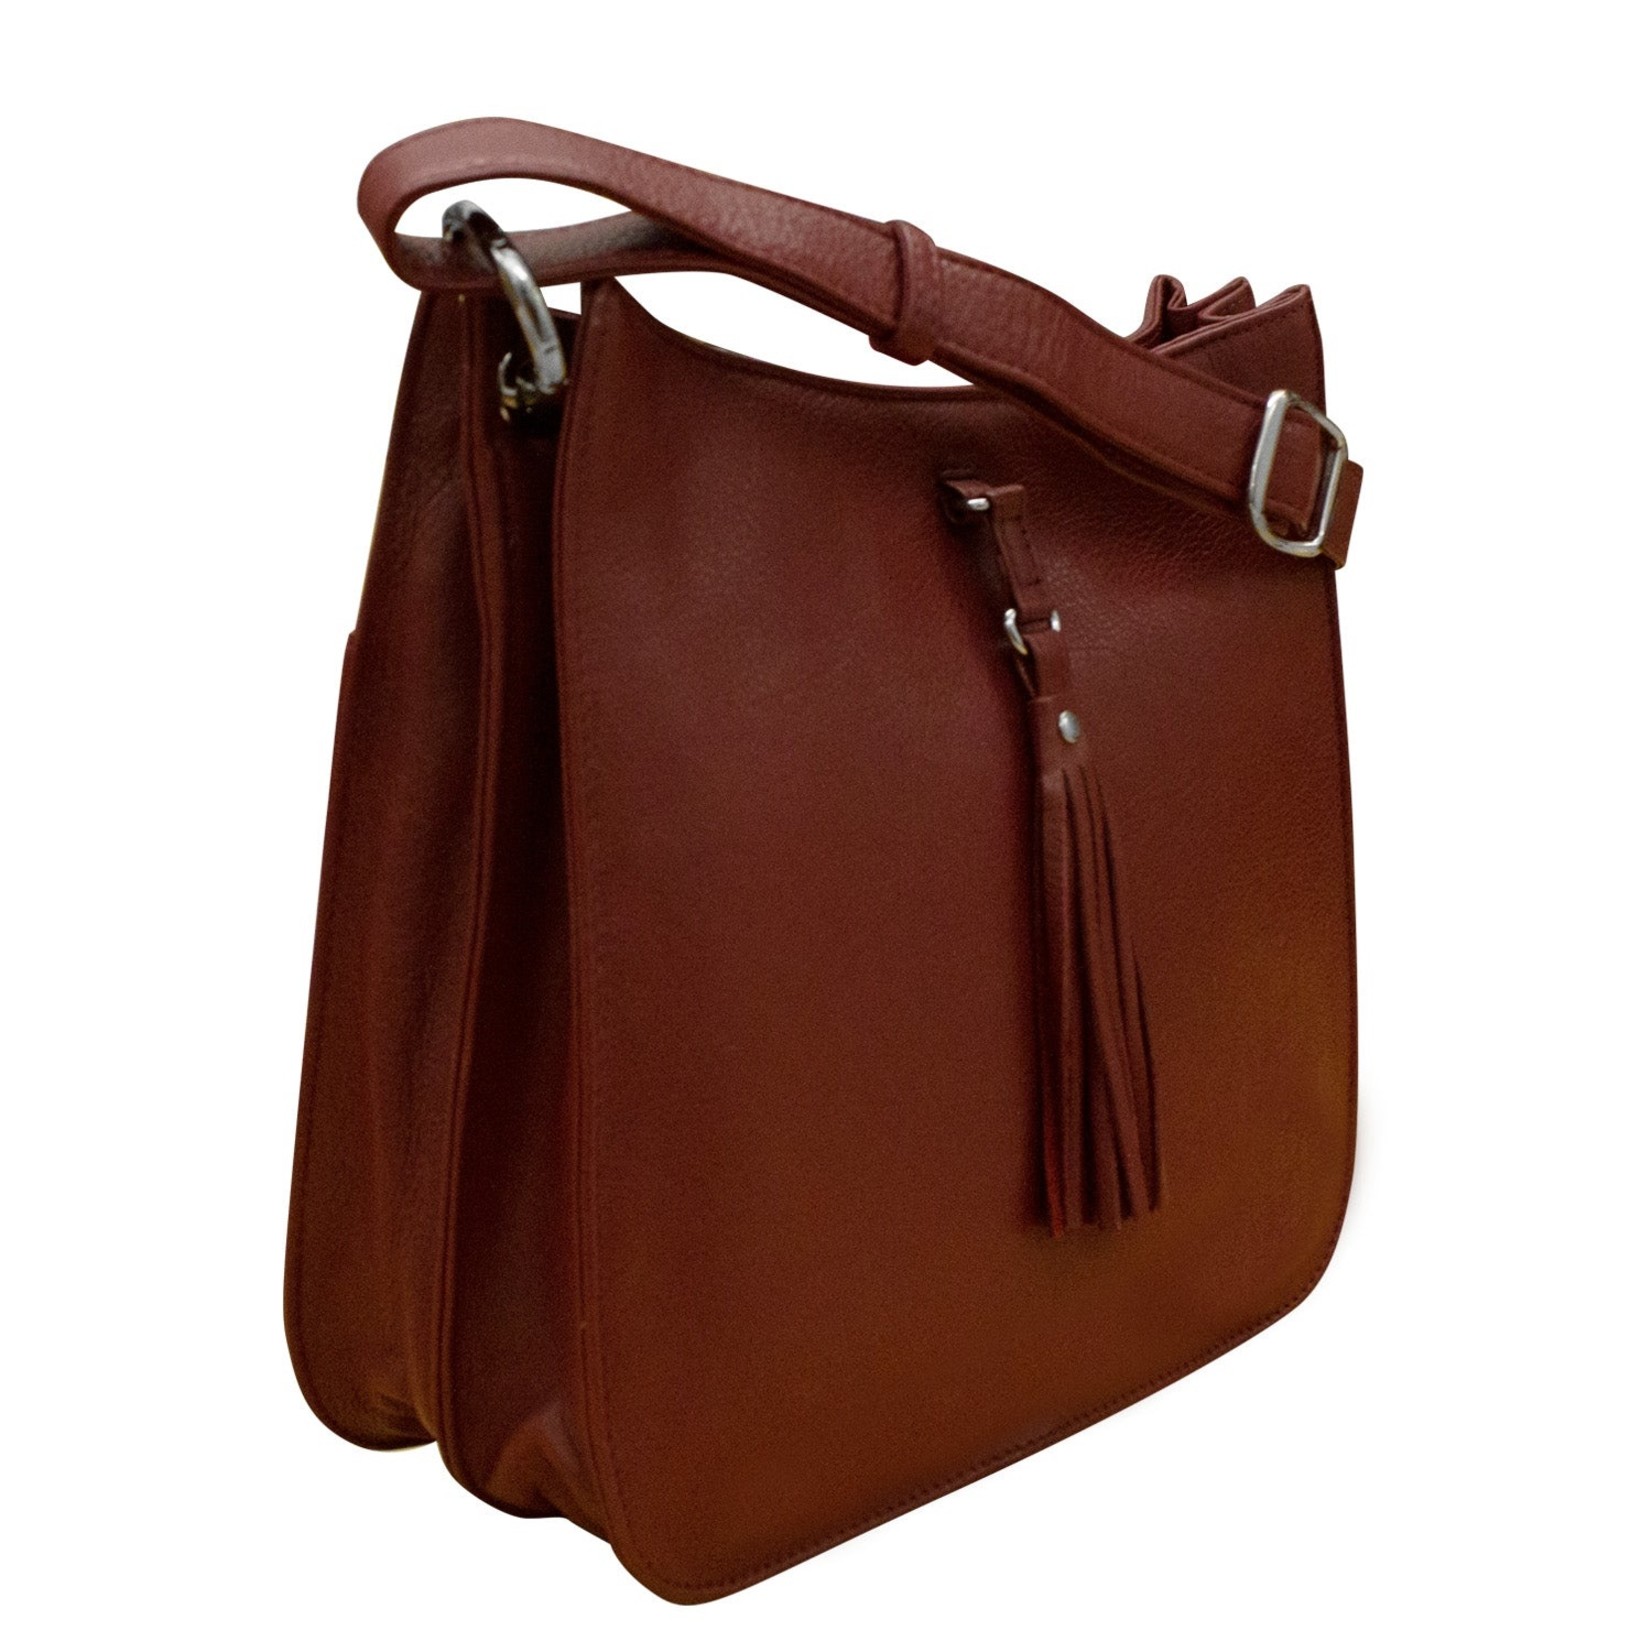 Leather Handbags and Accessories 6888 Merlot - Feed Bag with Tassel